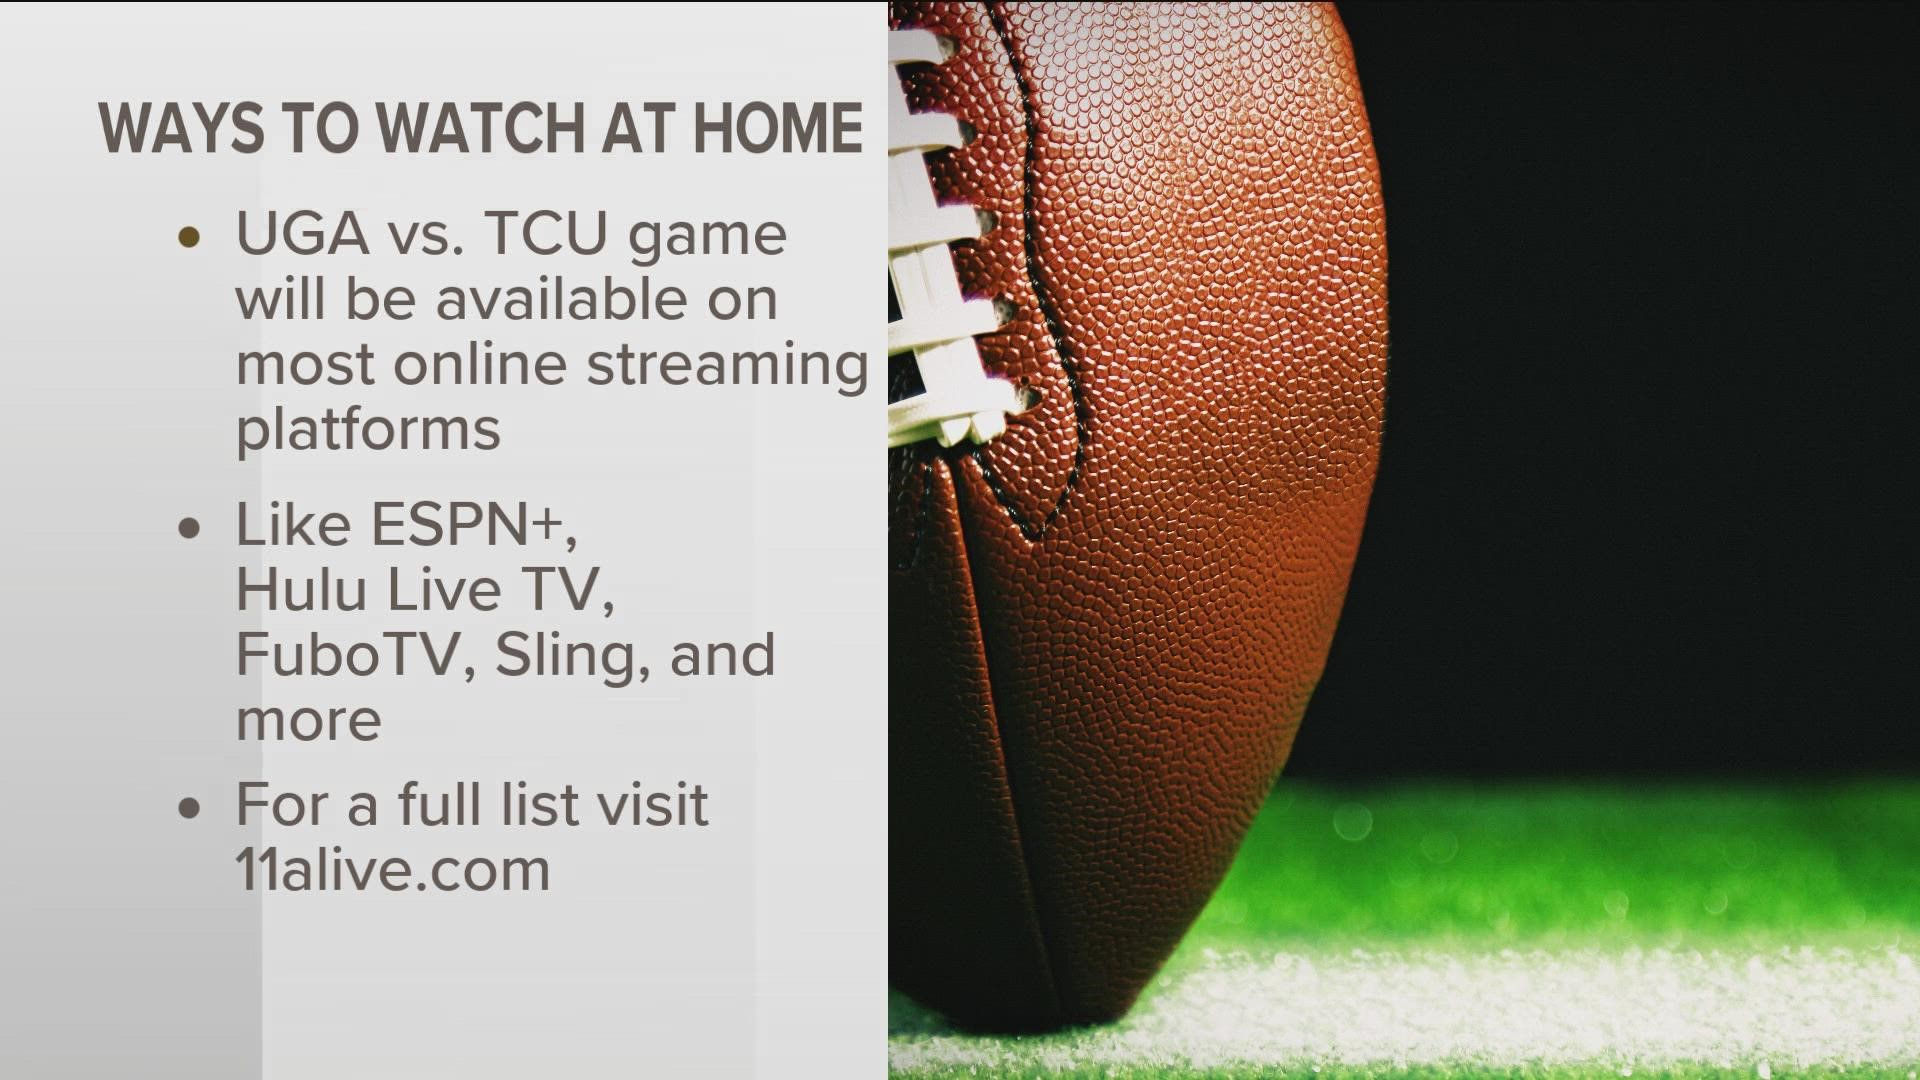 How to watch the UGA